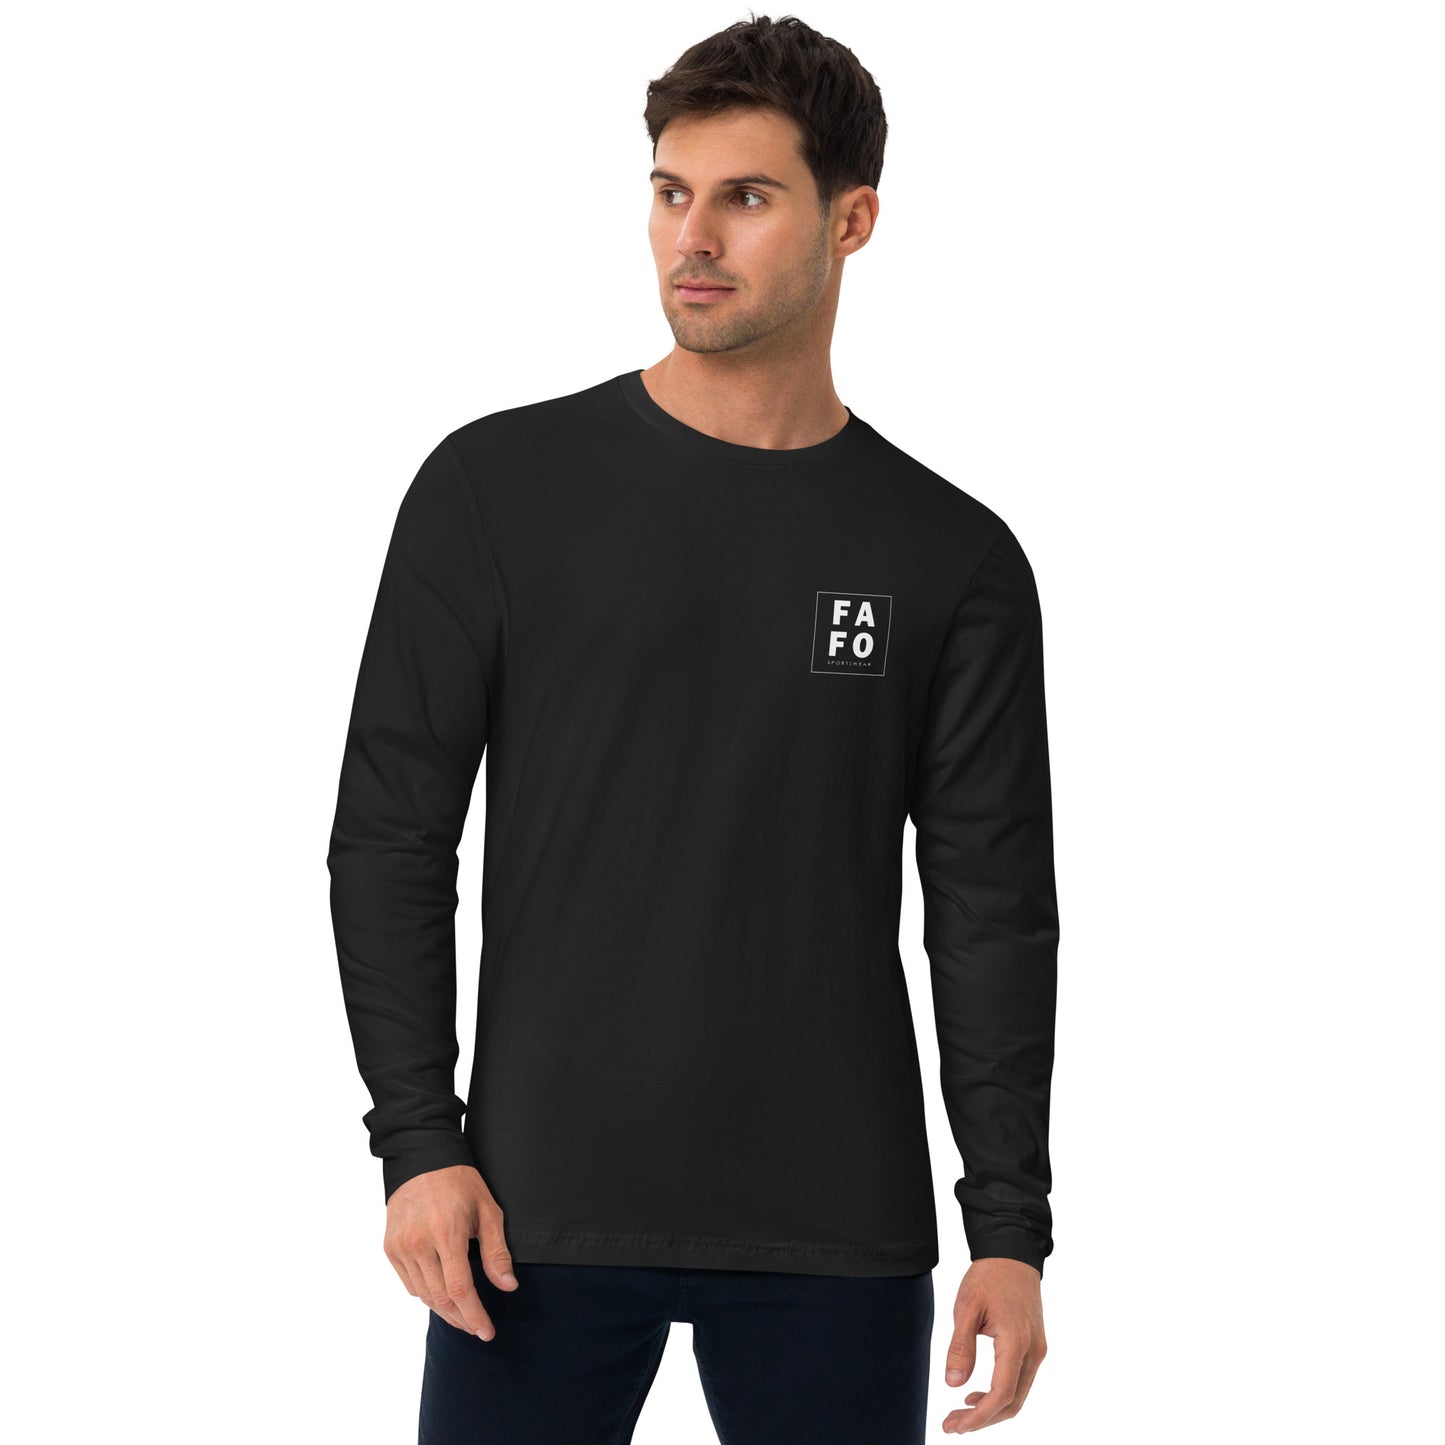 Men's Long Sleeve Crew Shirt - FAFO F*k Around & Find Out - FAFO Sportswear